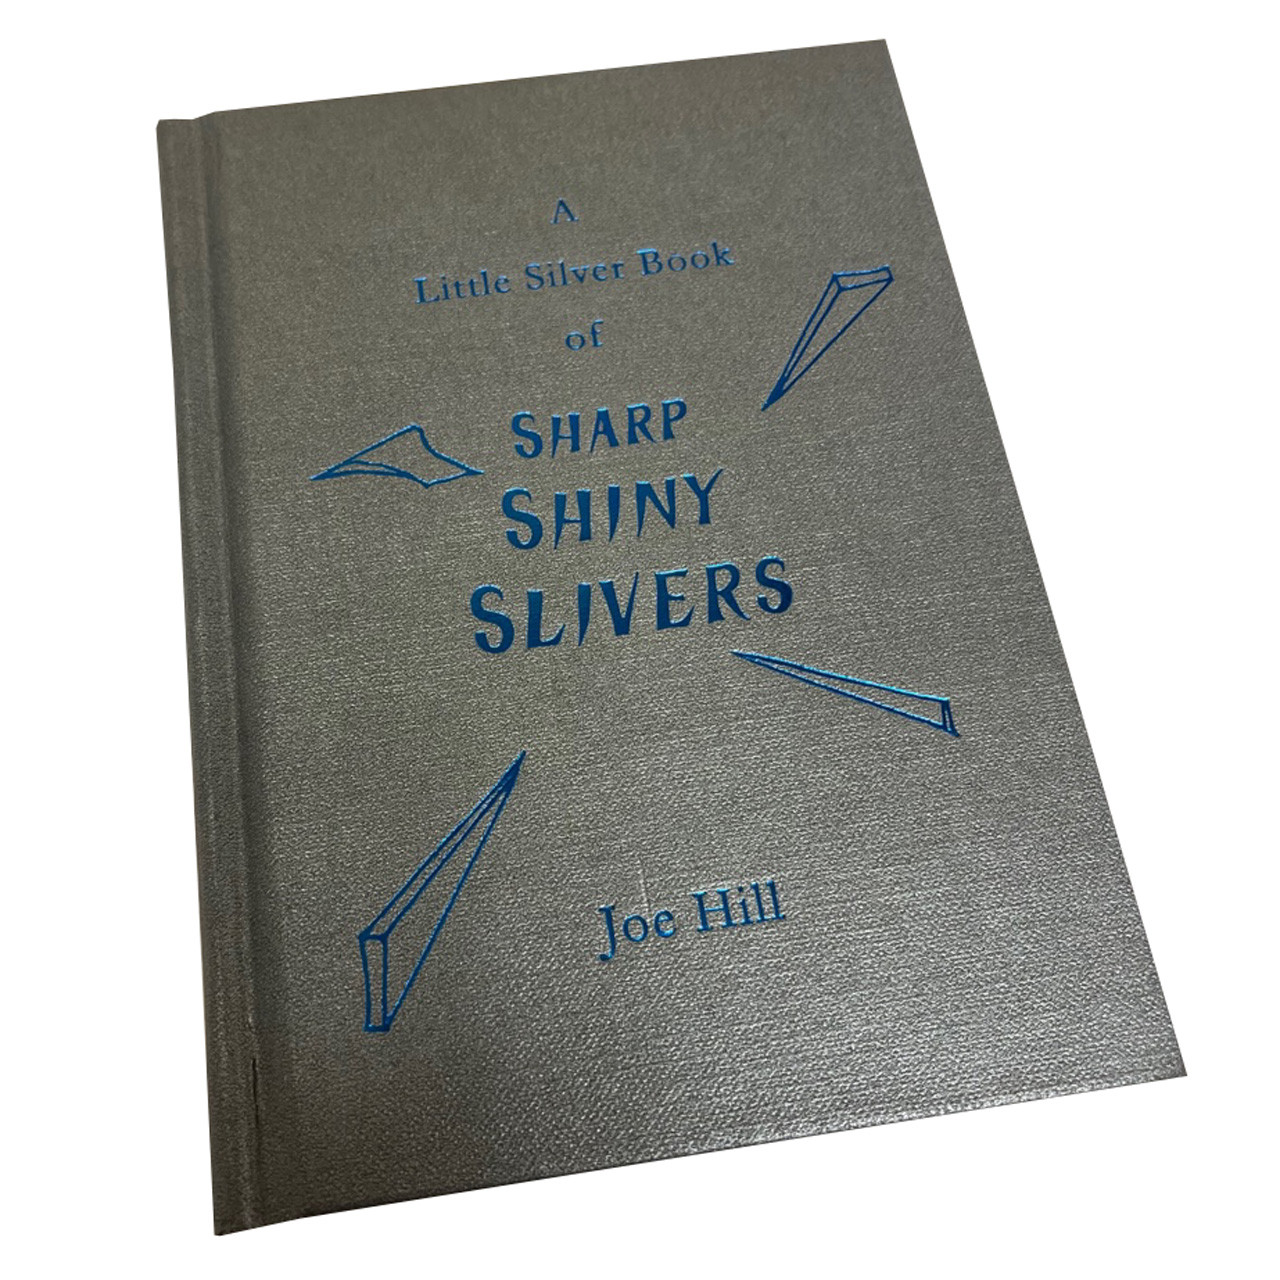 Joe Hill "A Little Silver Book of Sharp Shiny Slivers" Signed Limited Edition of 500 [Very Fine]